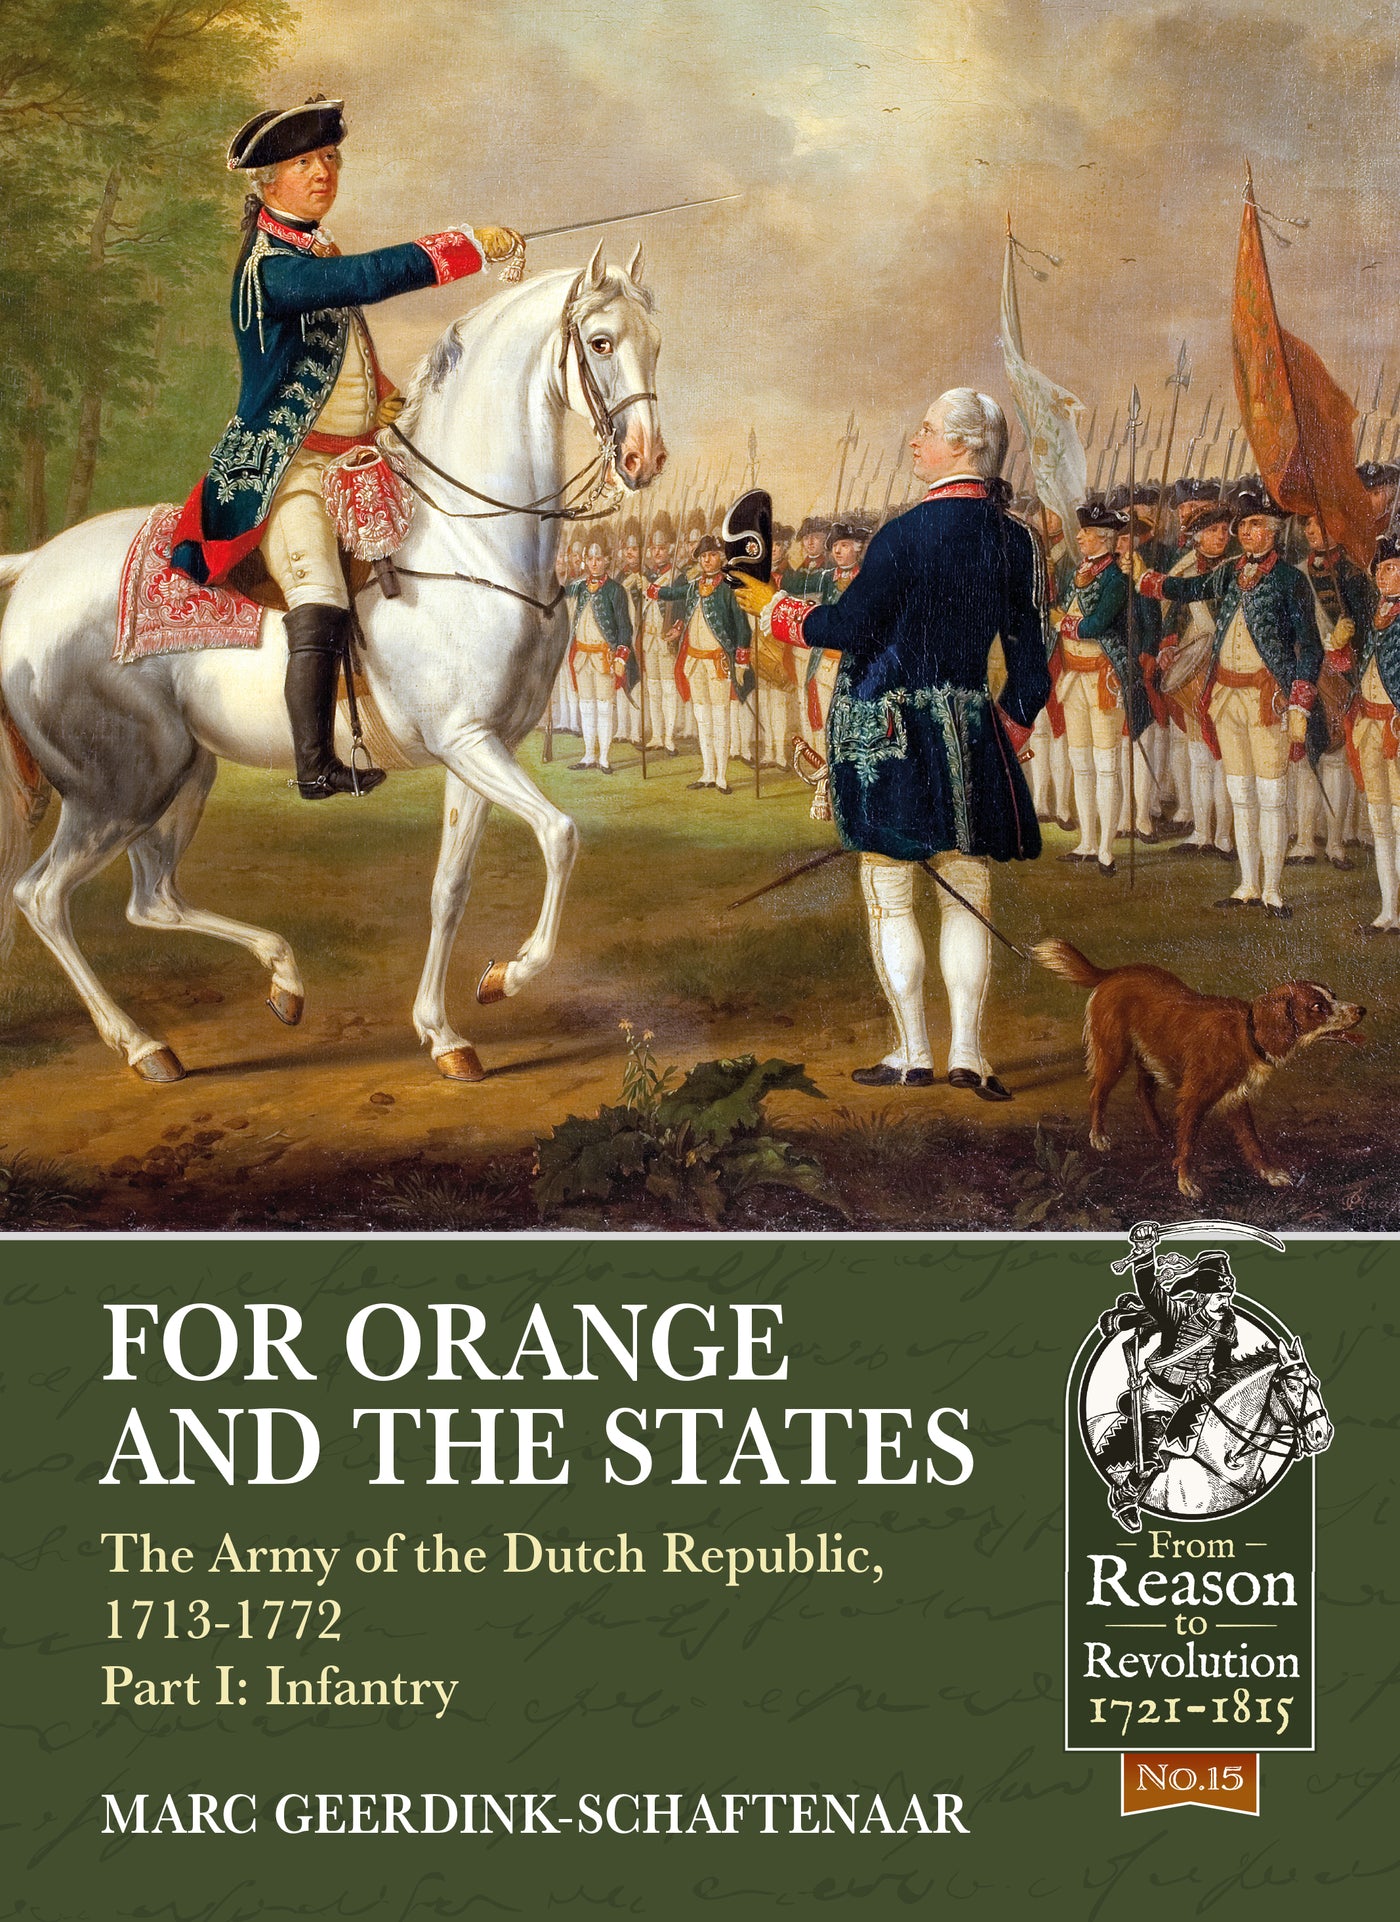 For Orange and the States: The Army of the Dutch Republic, 1713-1772